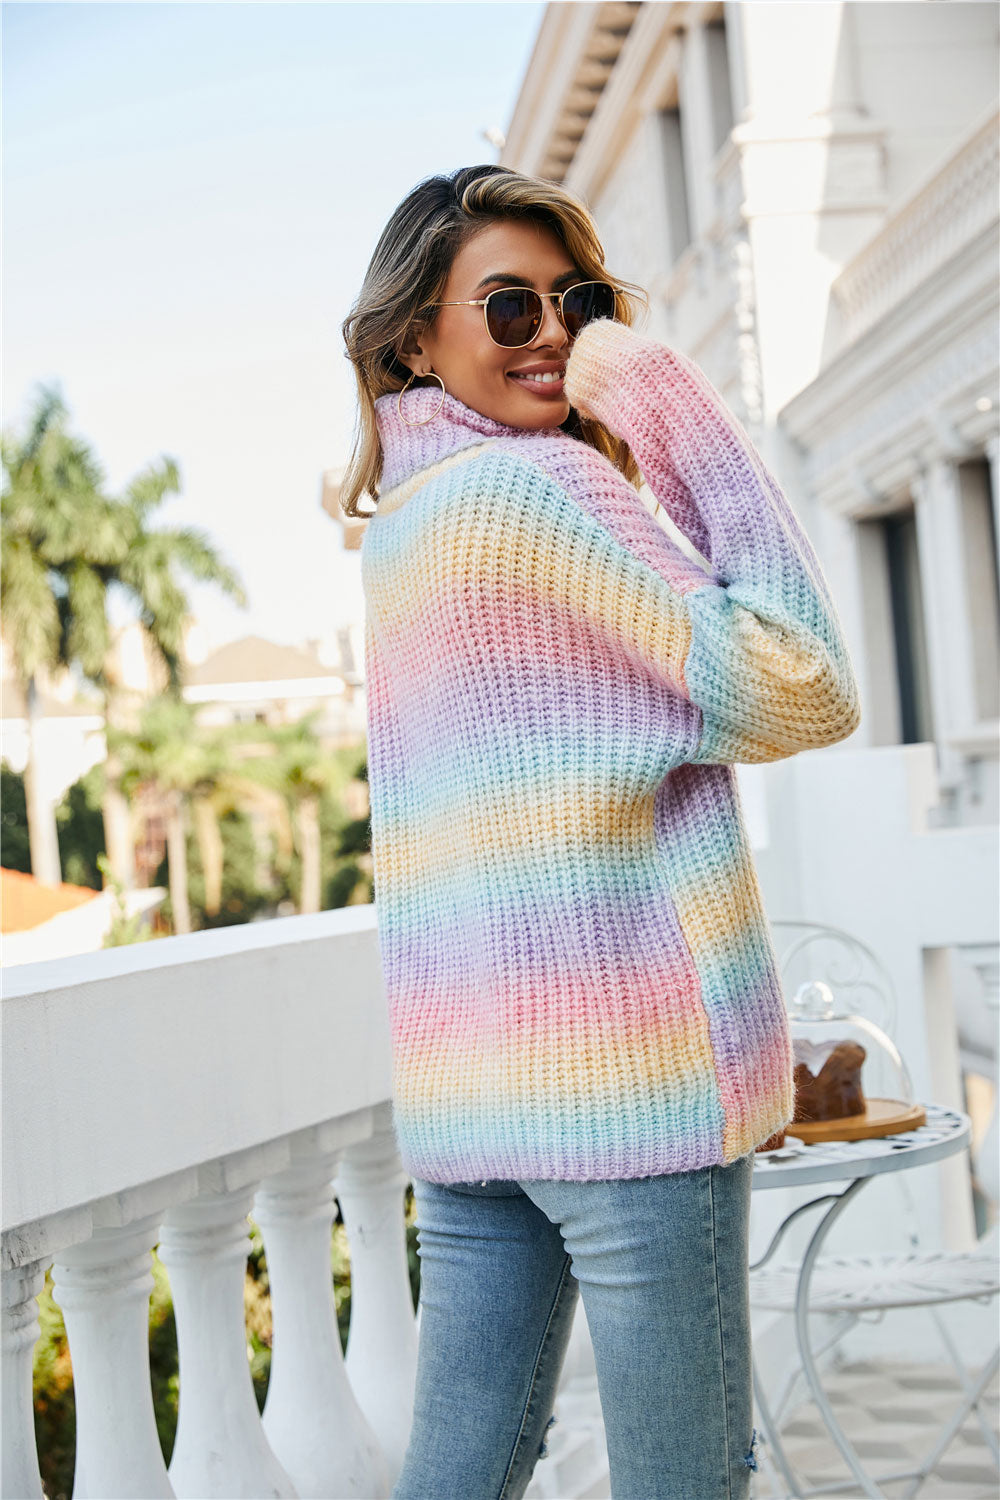 Chic Tie-Dye Turtleneck Knitted Sweater